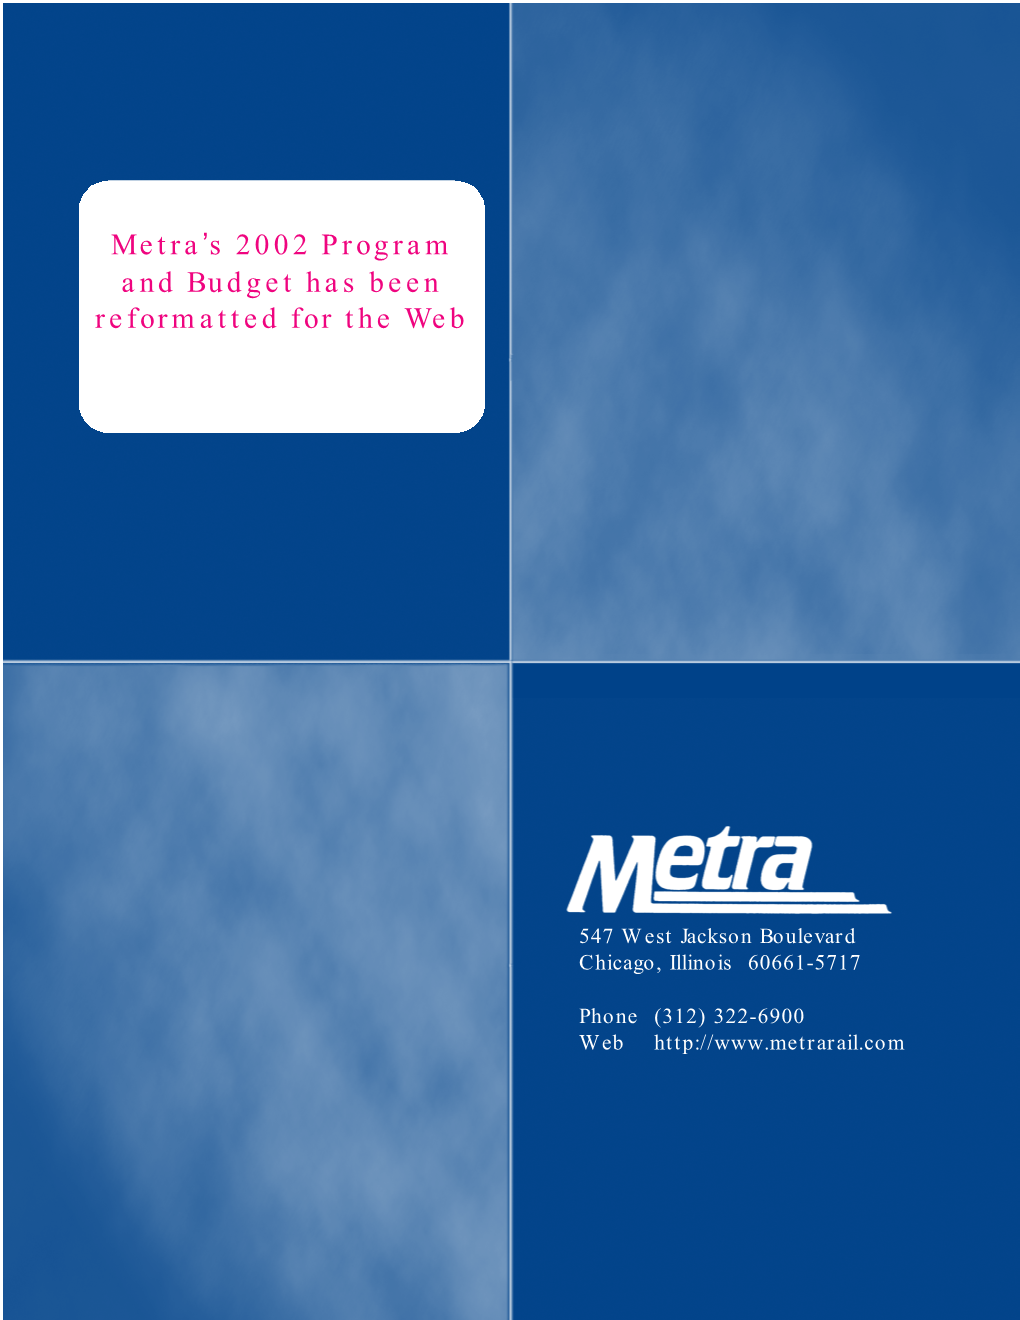 Metra's 2002 Program and Budget Has Been Reformatted for The